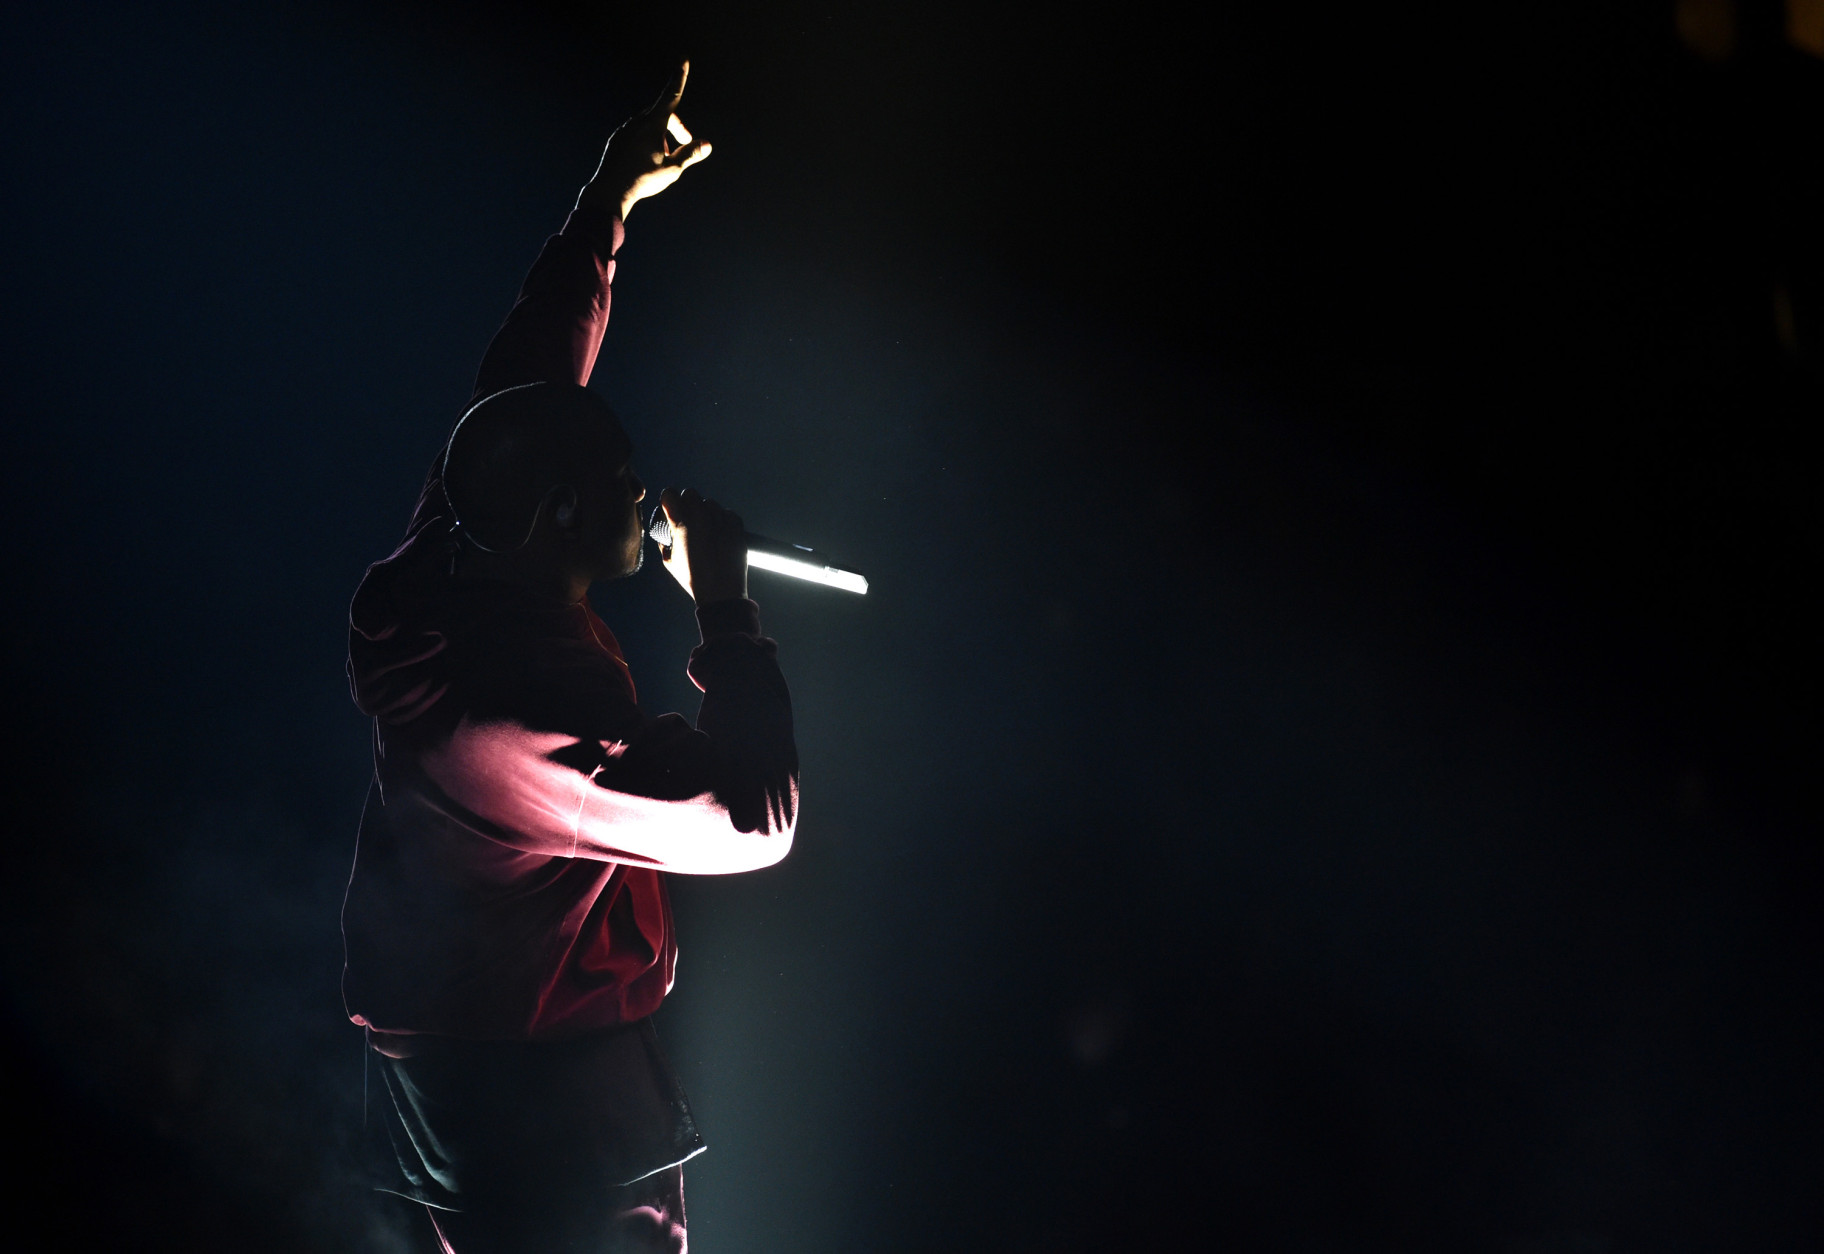 Kanye West performs at the 57th annual Grammy Awards on Sunday, Feb. 8, 2015, in Los Angeles. (Photo by John Shearer/Invision/AP)